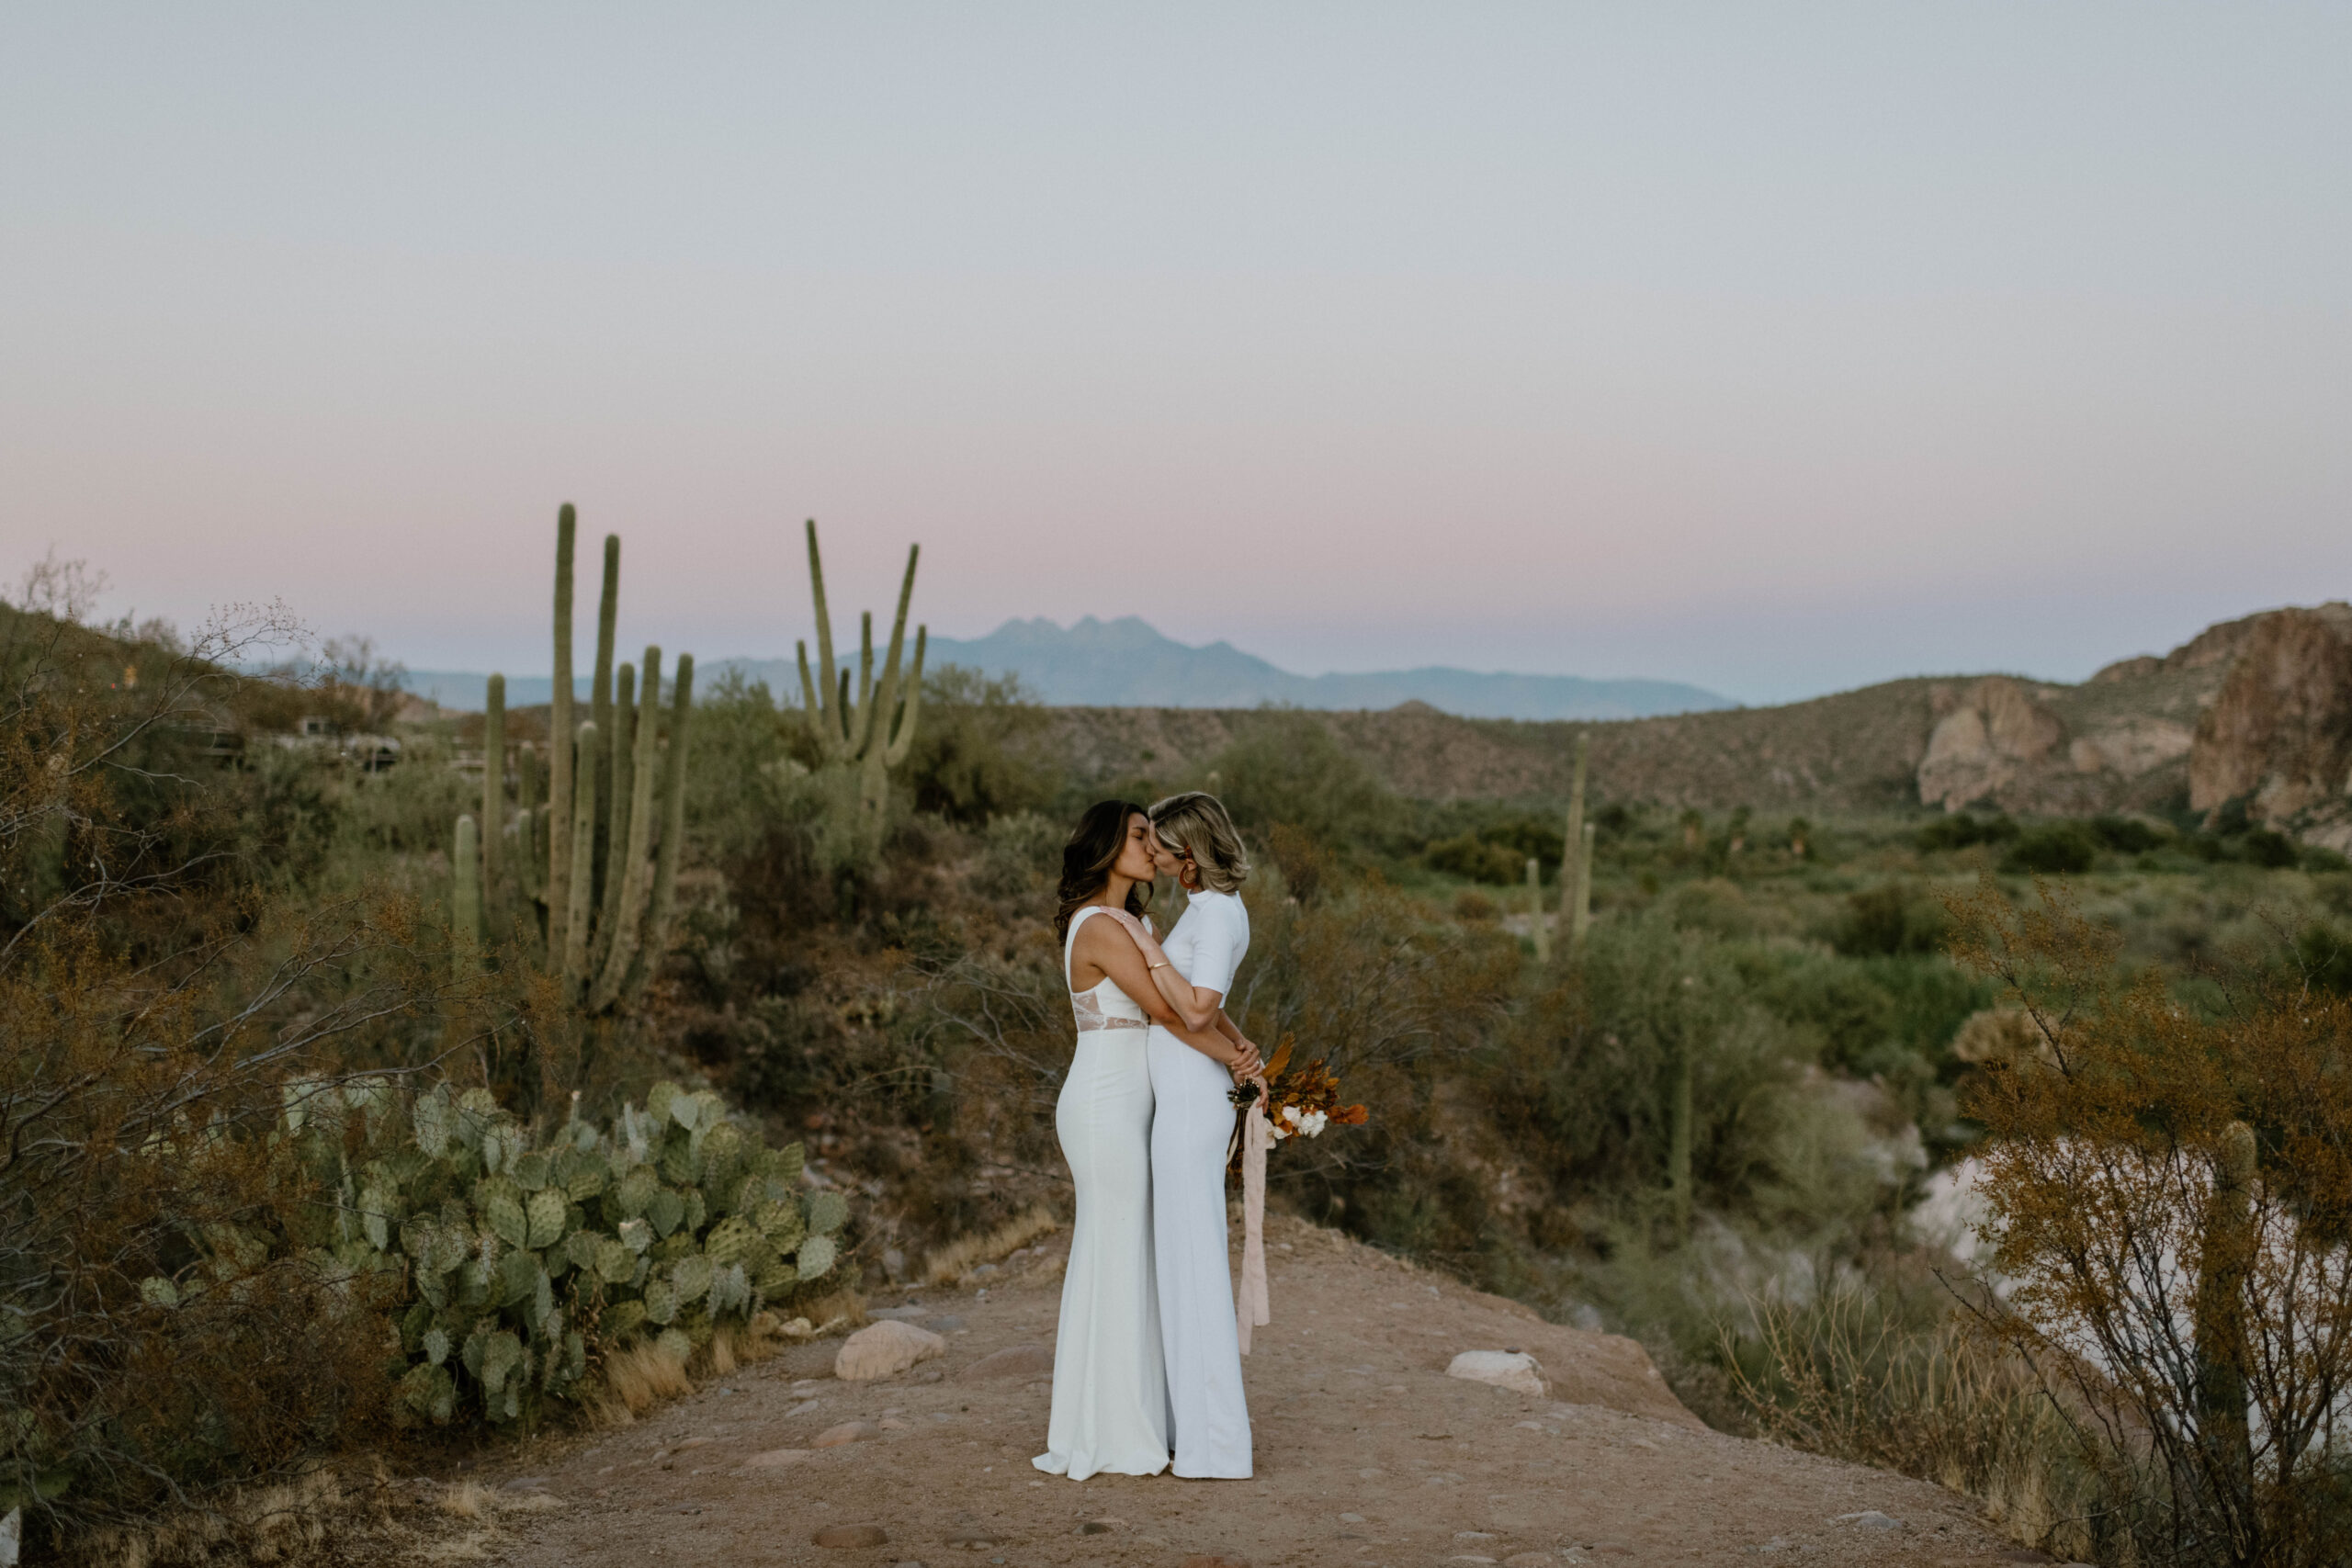 A couple leans in for a kiss during after their wedding vows in the desert